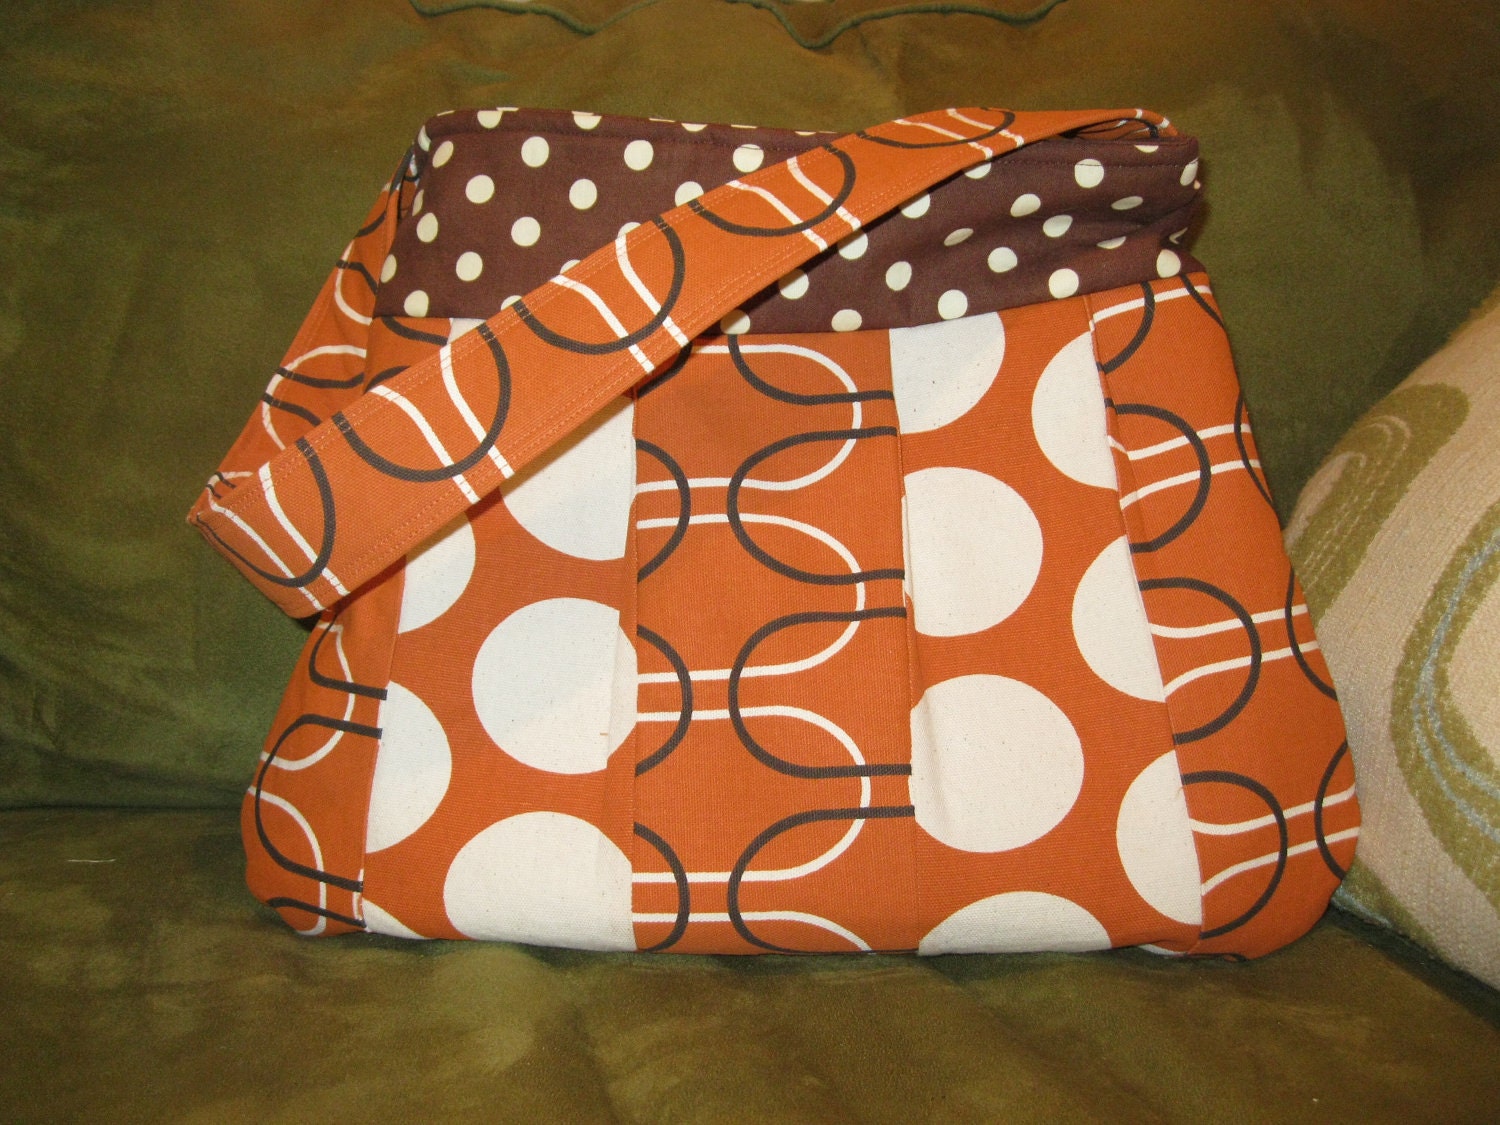 Handmade Fabric Bags Purses - Quilted - Orange and Brown  - Polka Dots